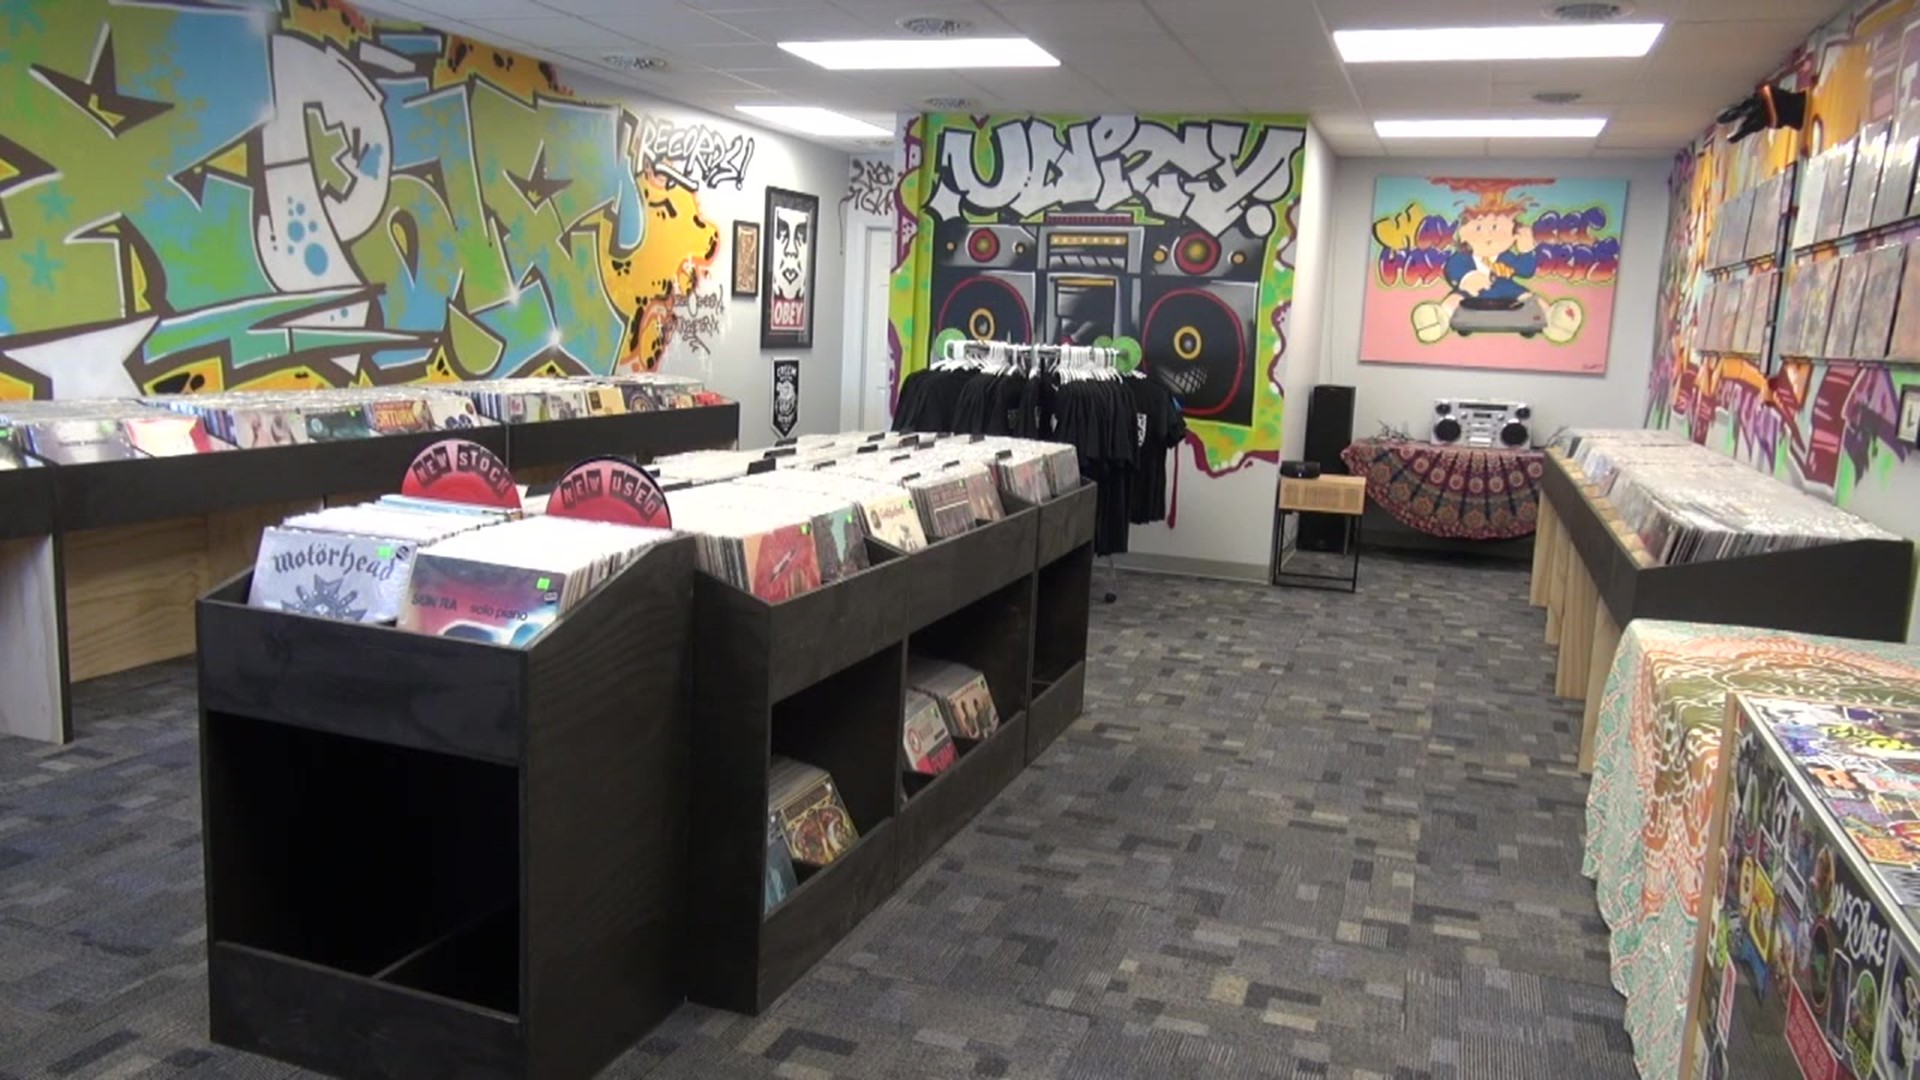 The grand reopening of WaxPax Records is this Saturday at 10 a.m. in Berwick.